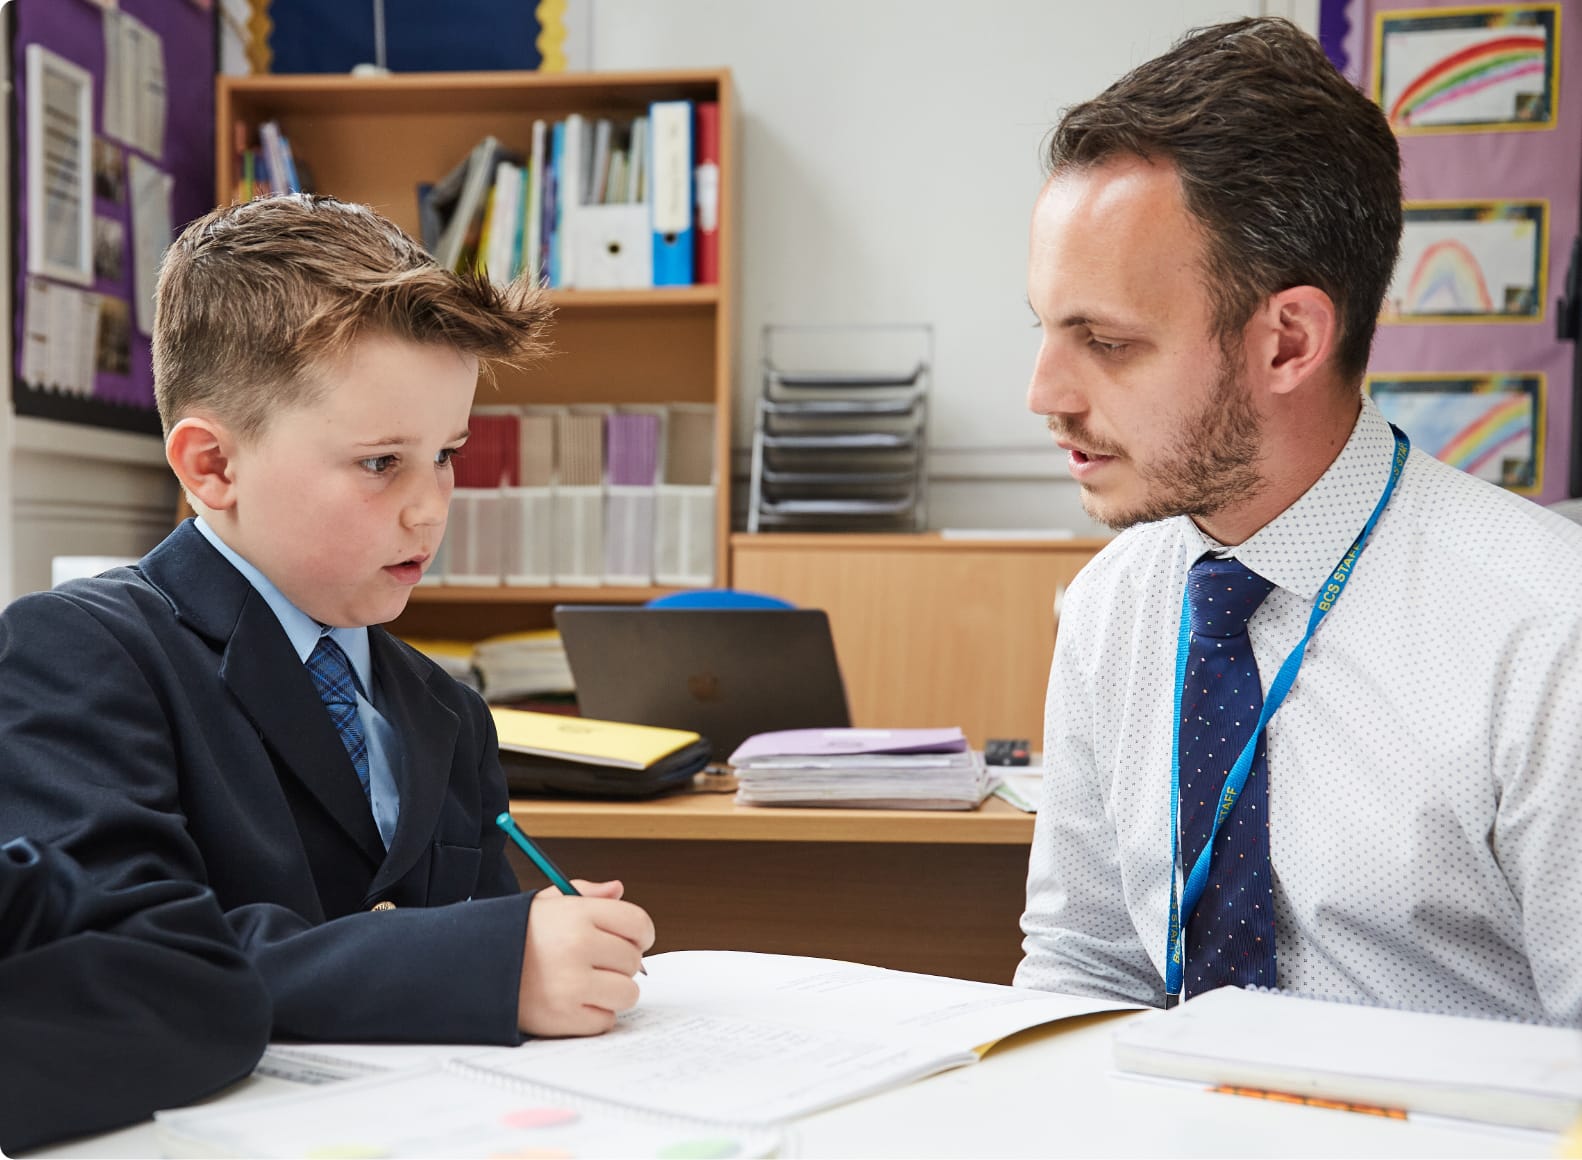 A teacher sat at a desk with a pupil who is writing and asking the teacher a question.